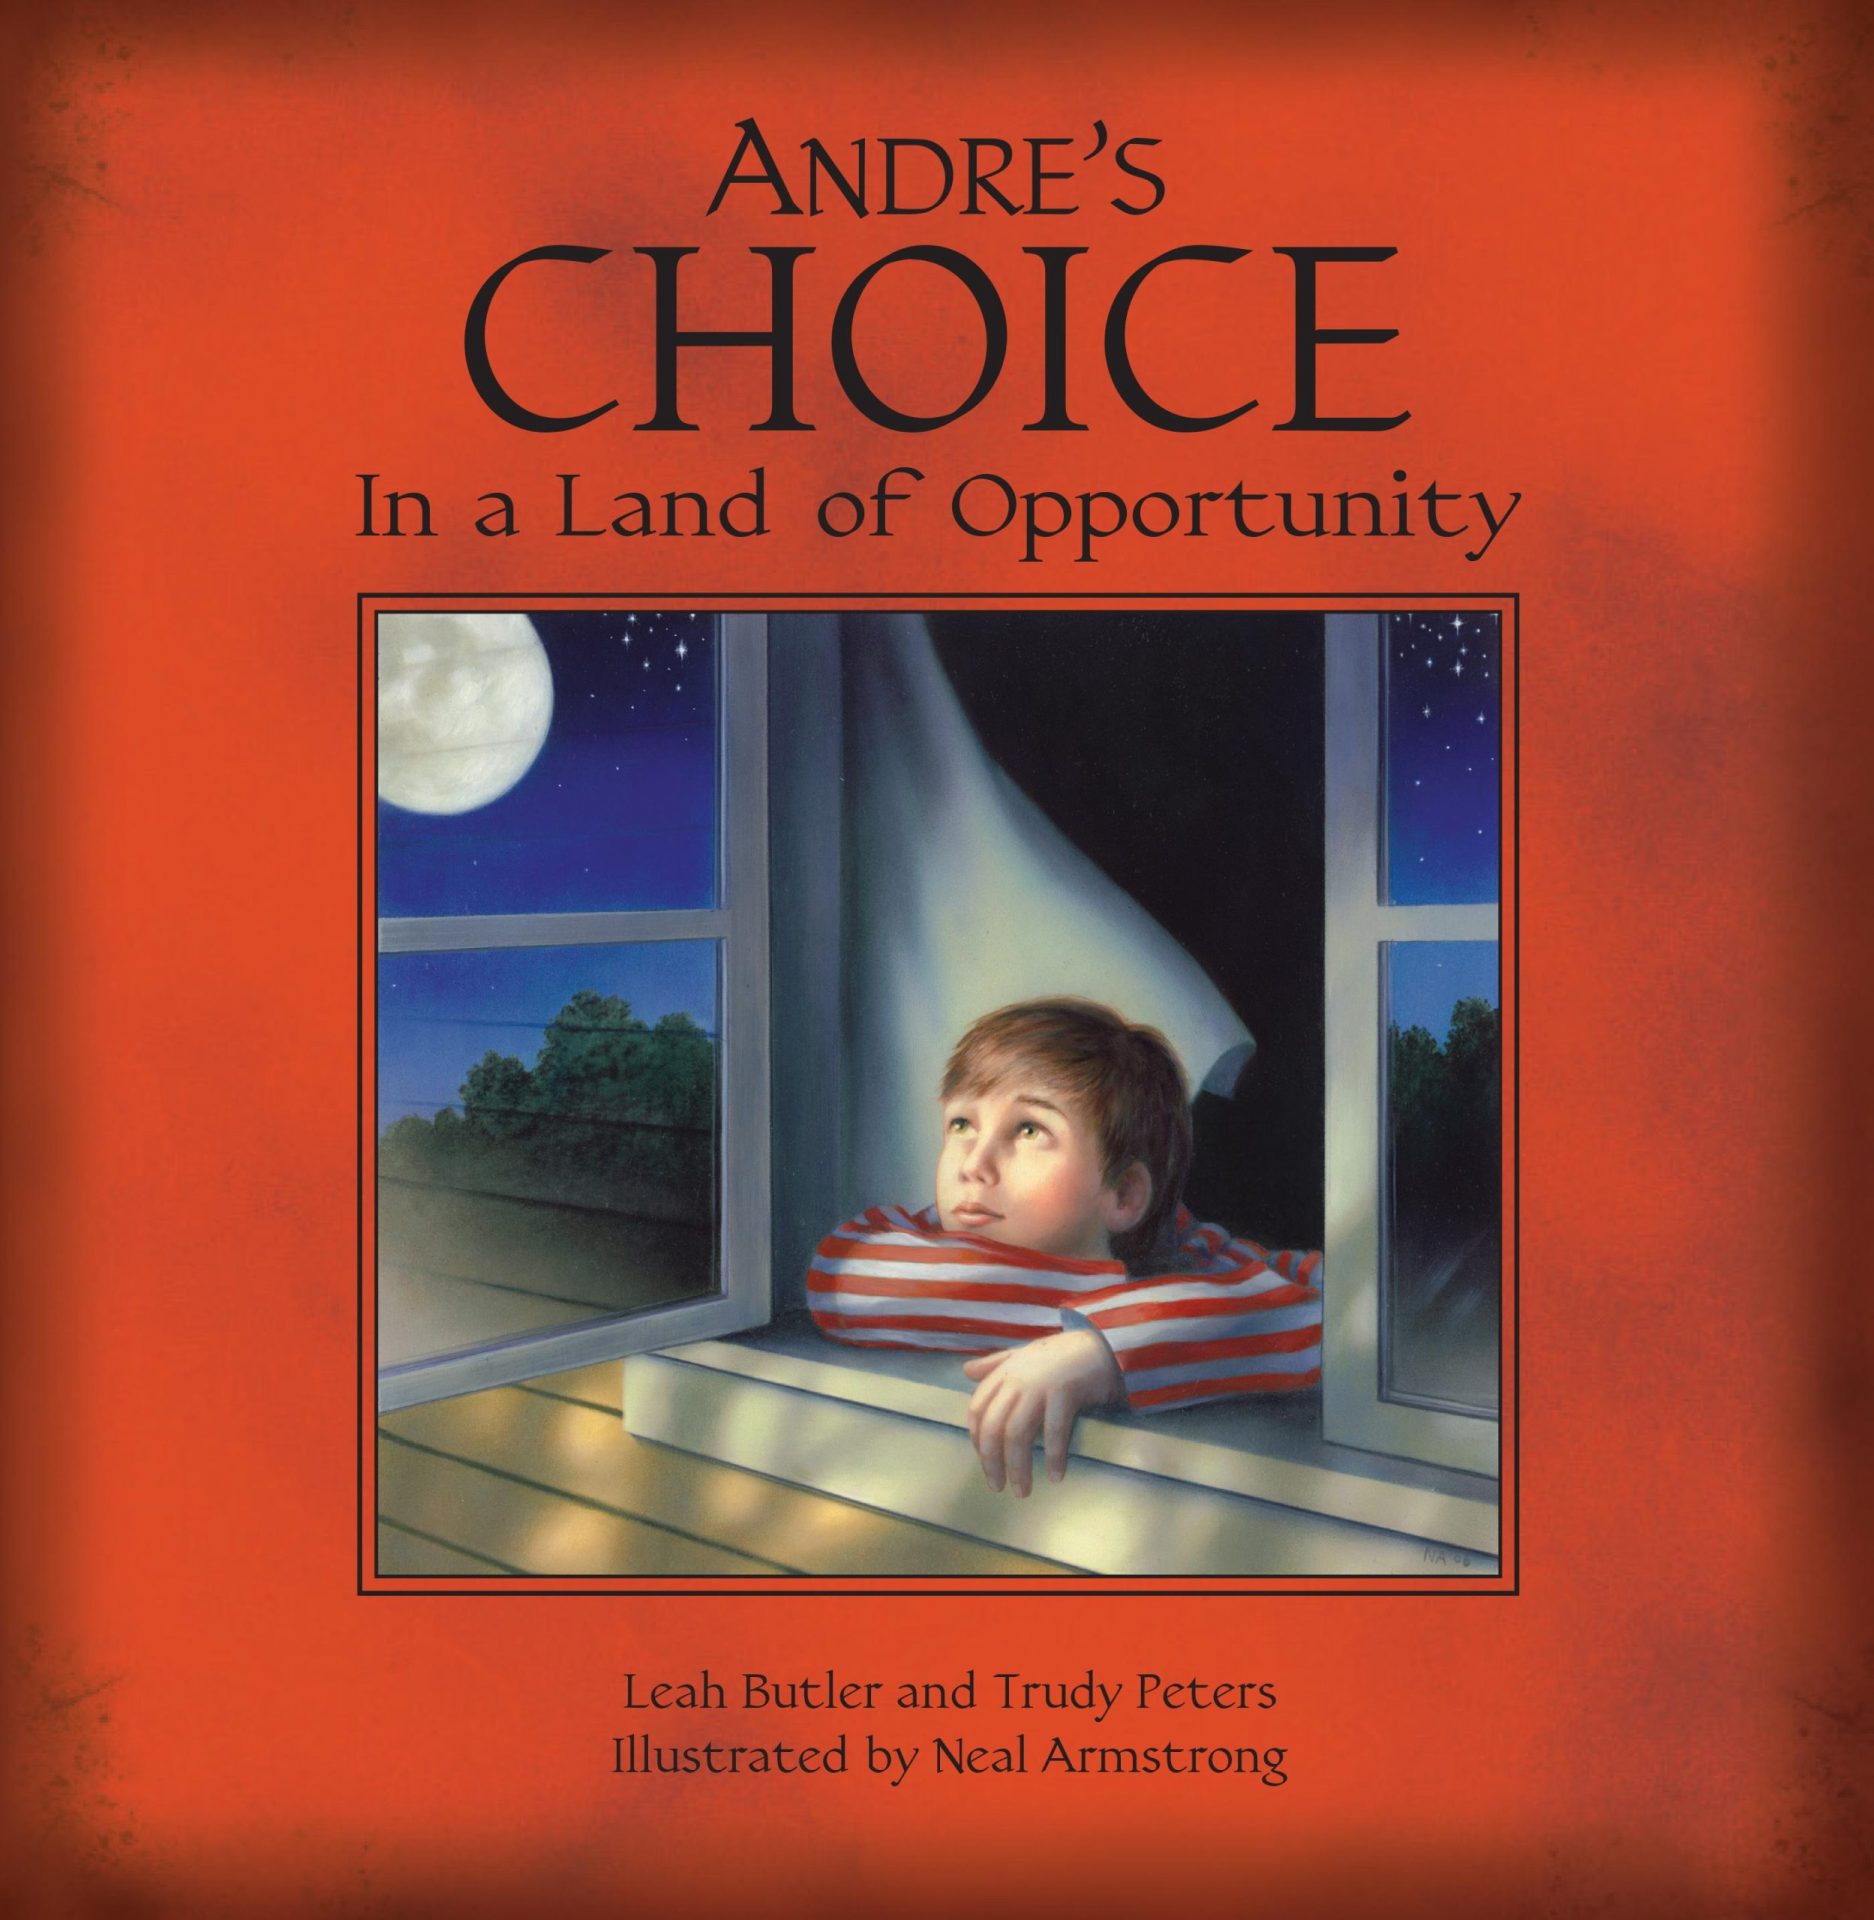 Andre's Choice